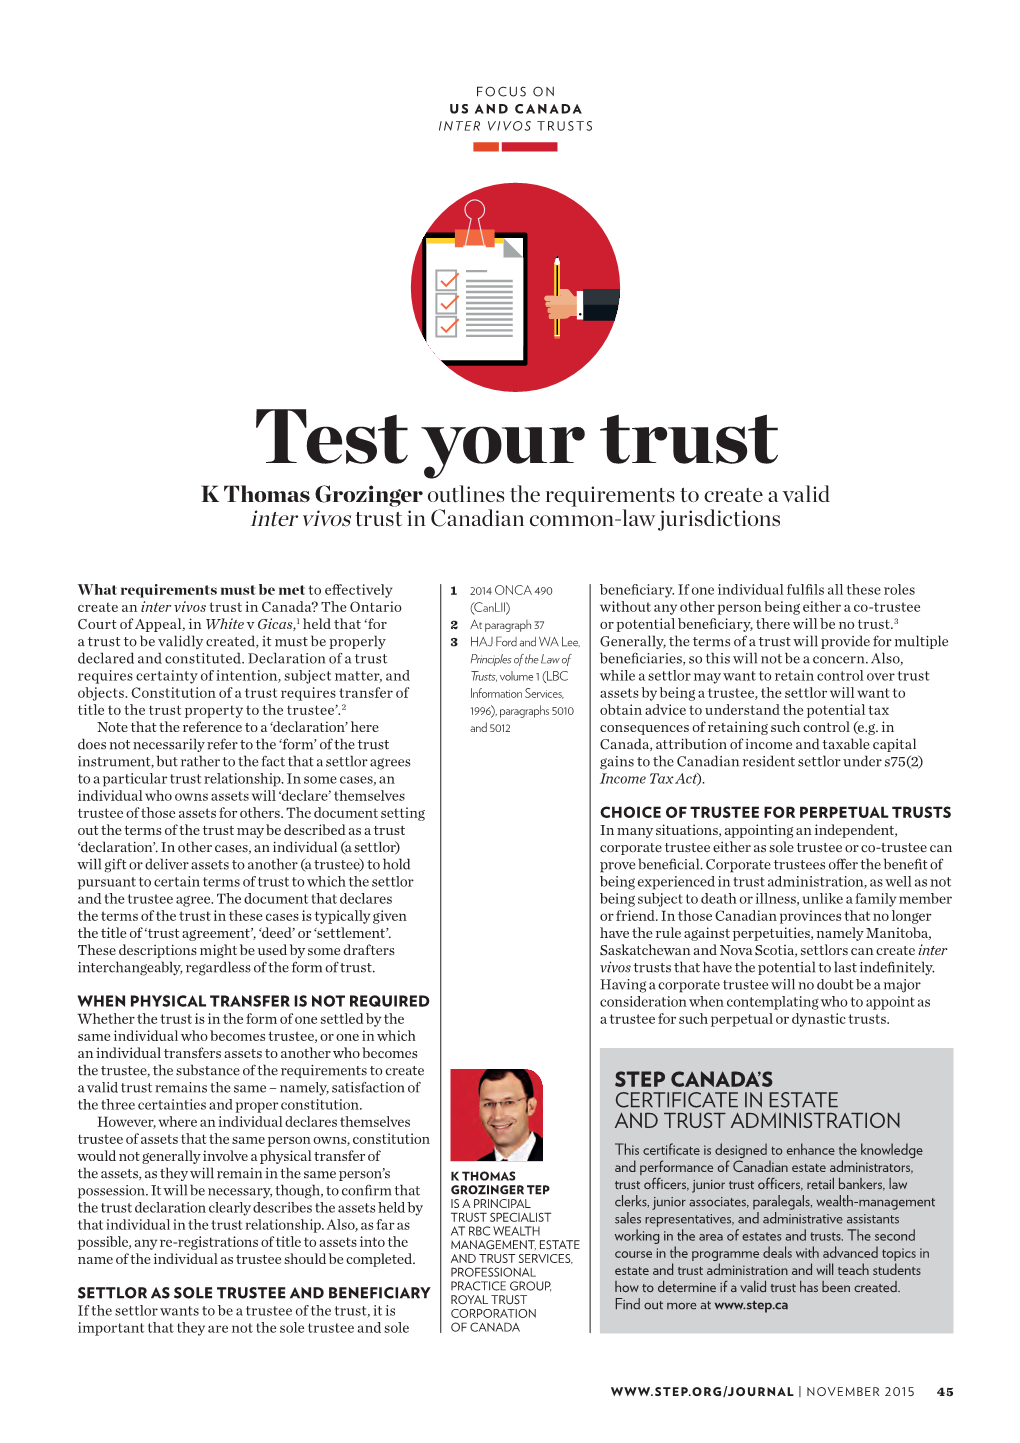 Test Your Trust K Thomas Grozinger Outlines the Requirements to Create a Valid Inter Vivos Trust in Canadian Common-Law Jurisdictions